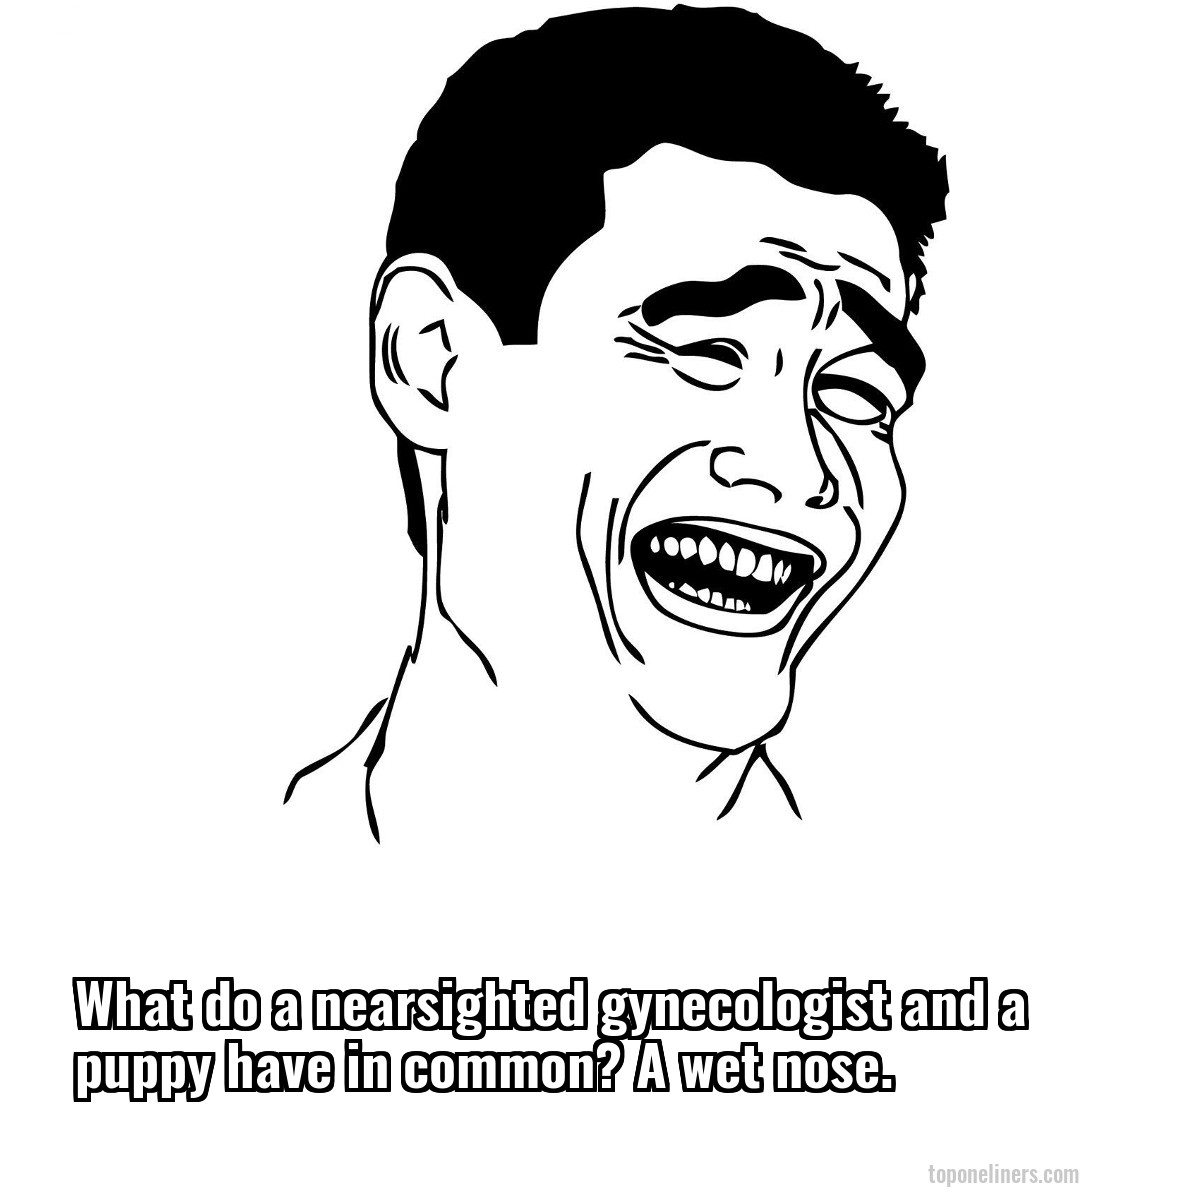 What do a nearsighted gynecologist and a puppy have in common? A wet nose.